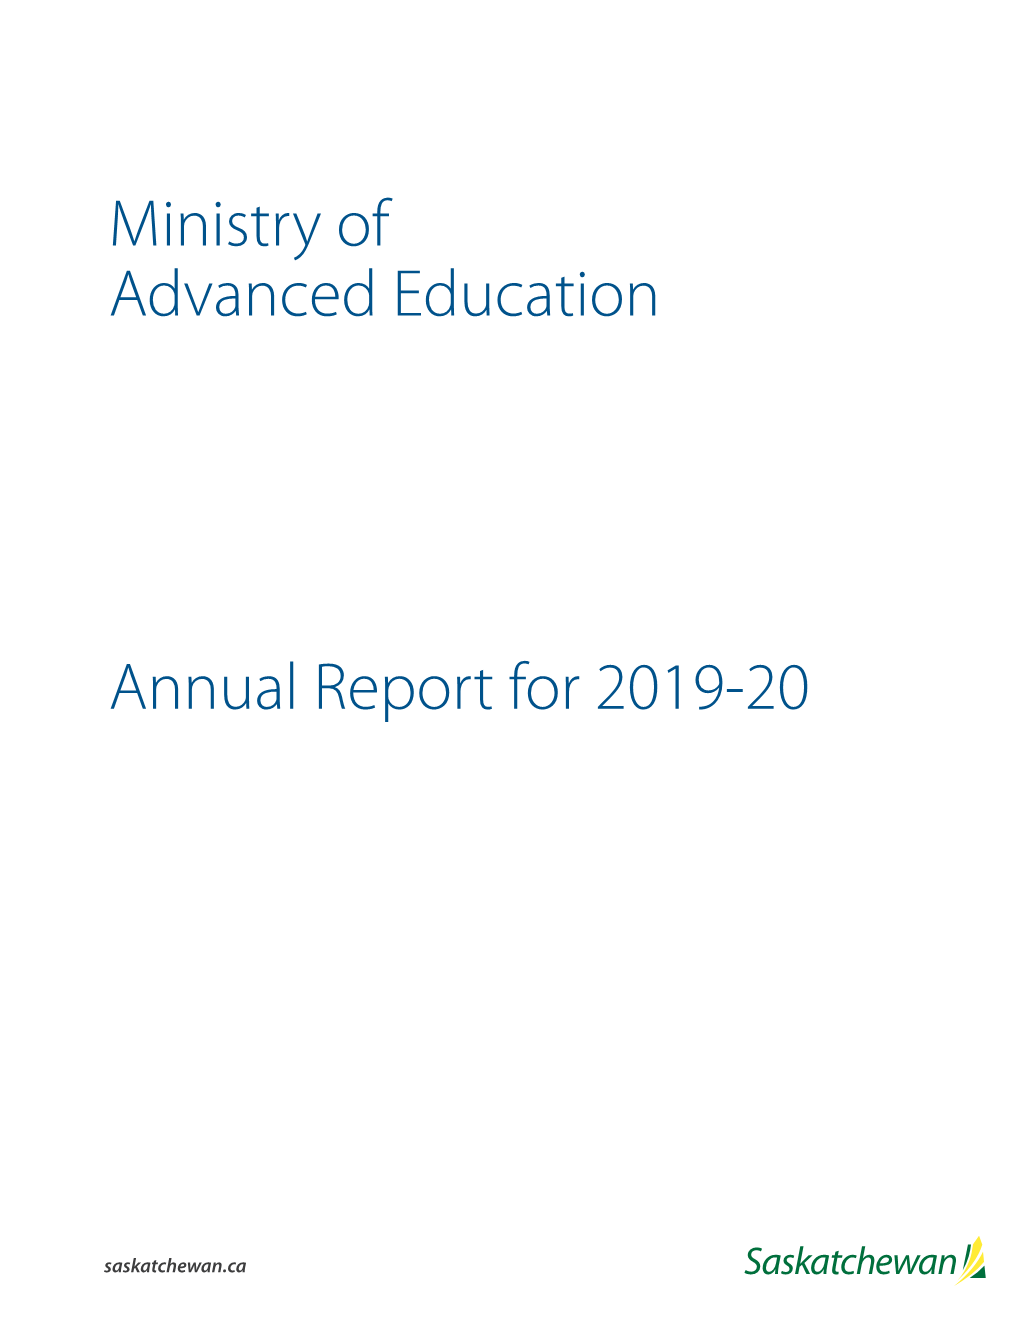 Annual Report for 2019-20 Ministry of Advanced Education